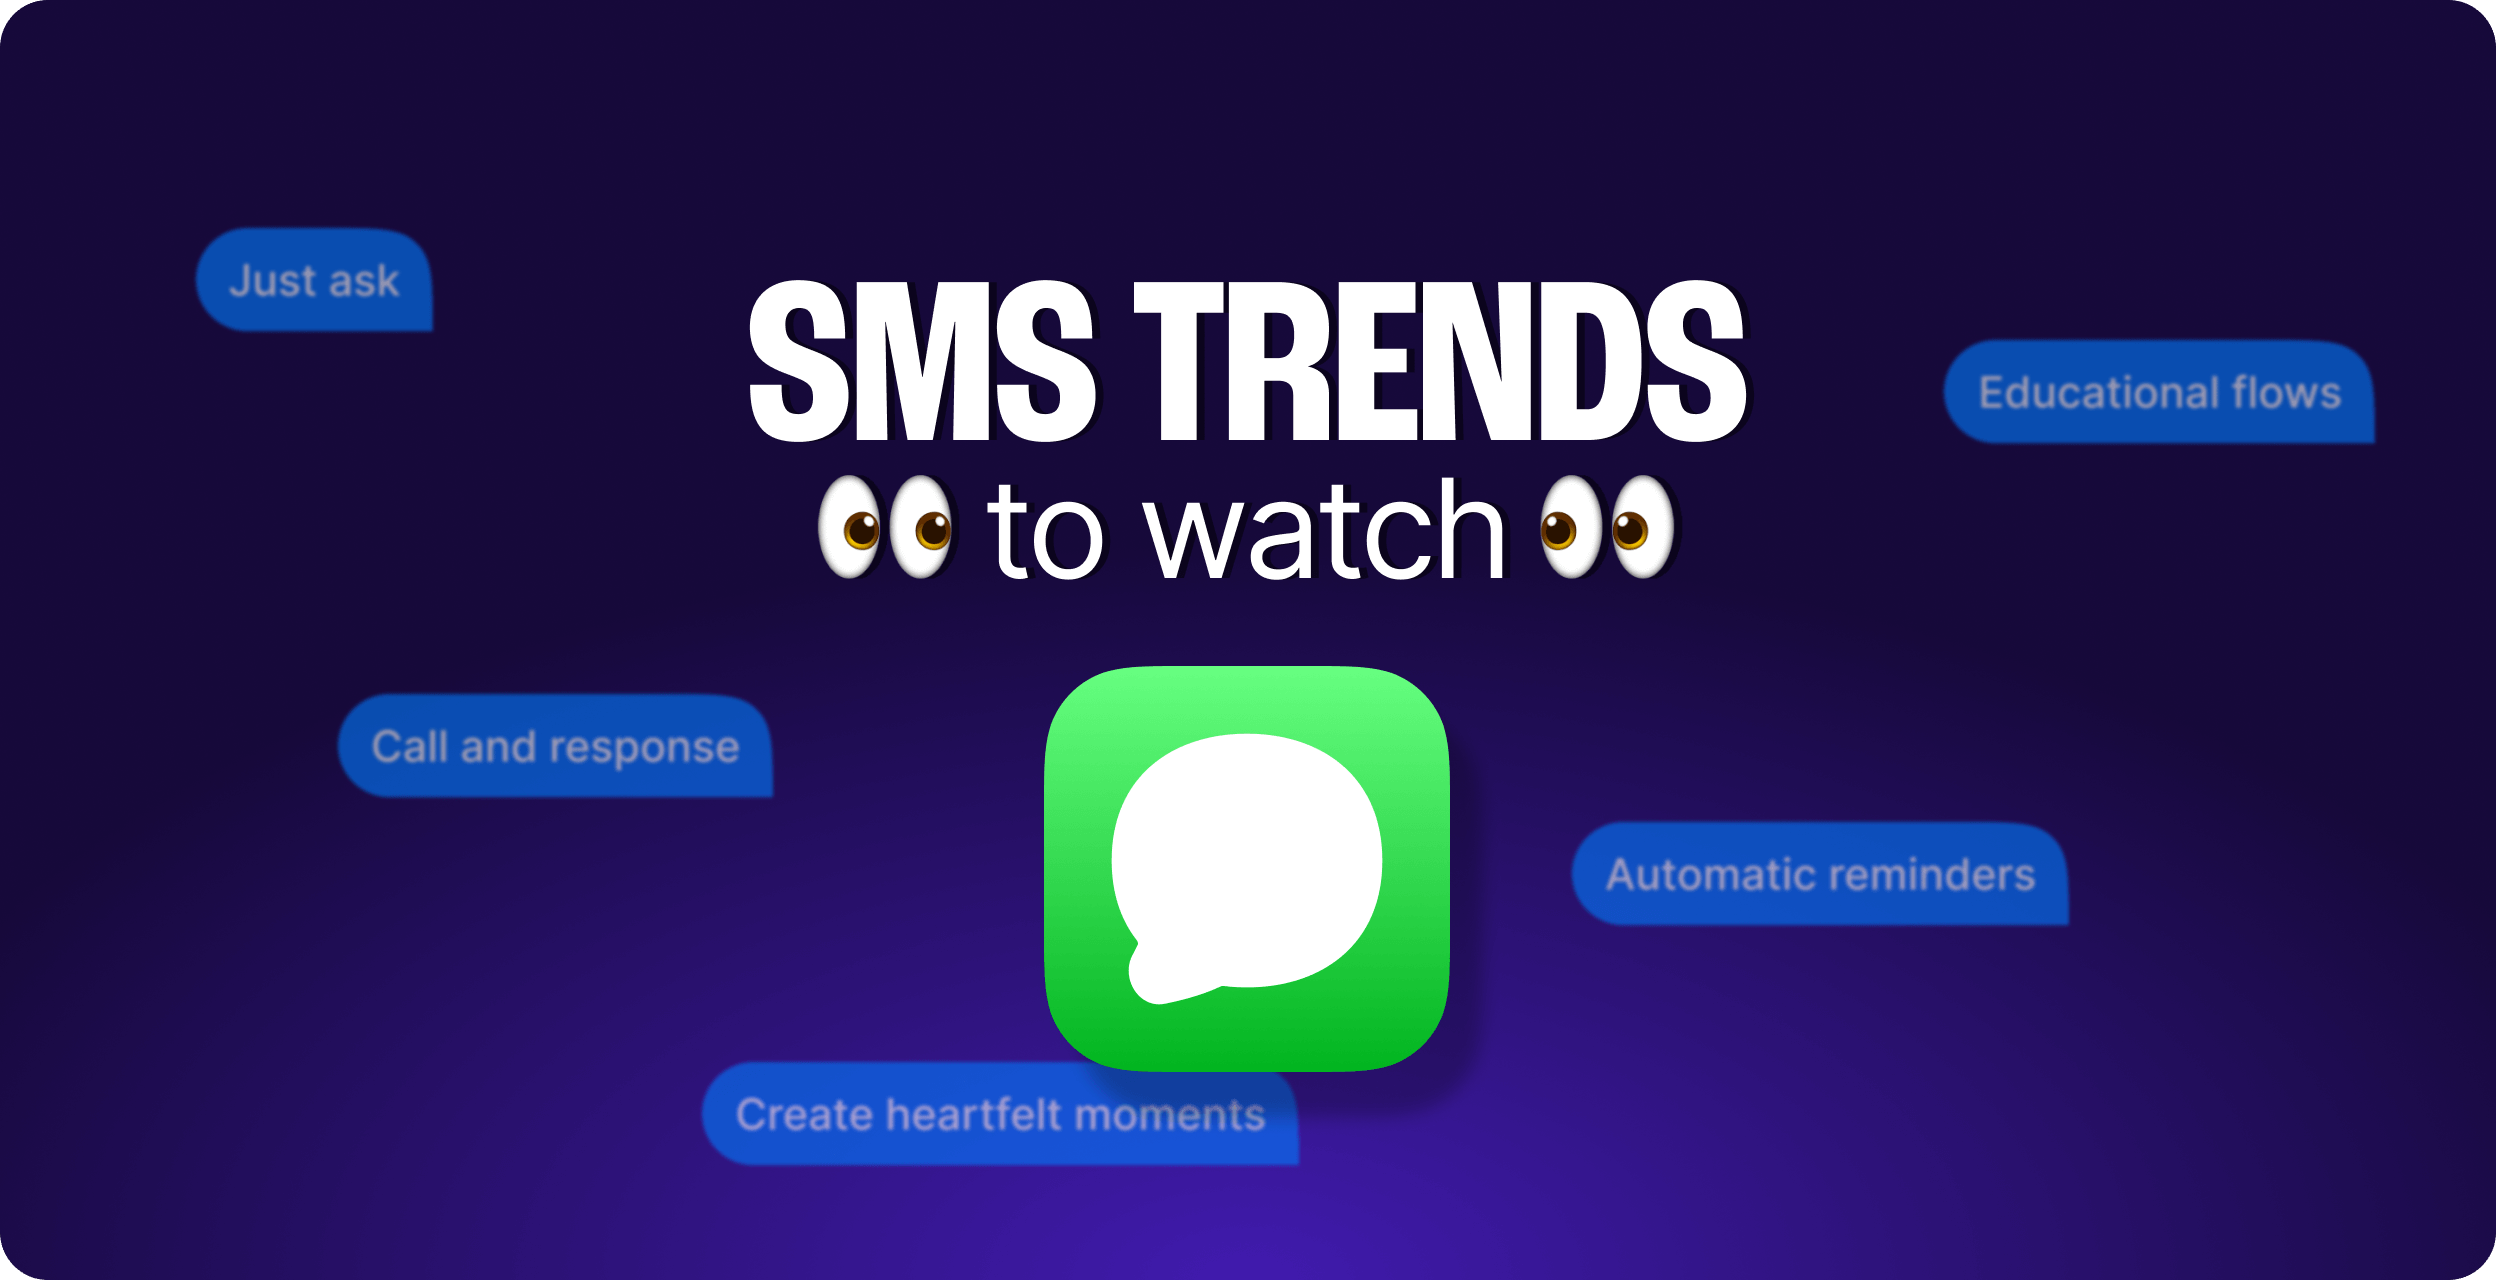 Next in Text: The SMS Trends Your Brand Should Capitalize On 